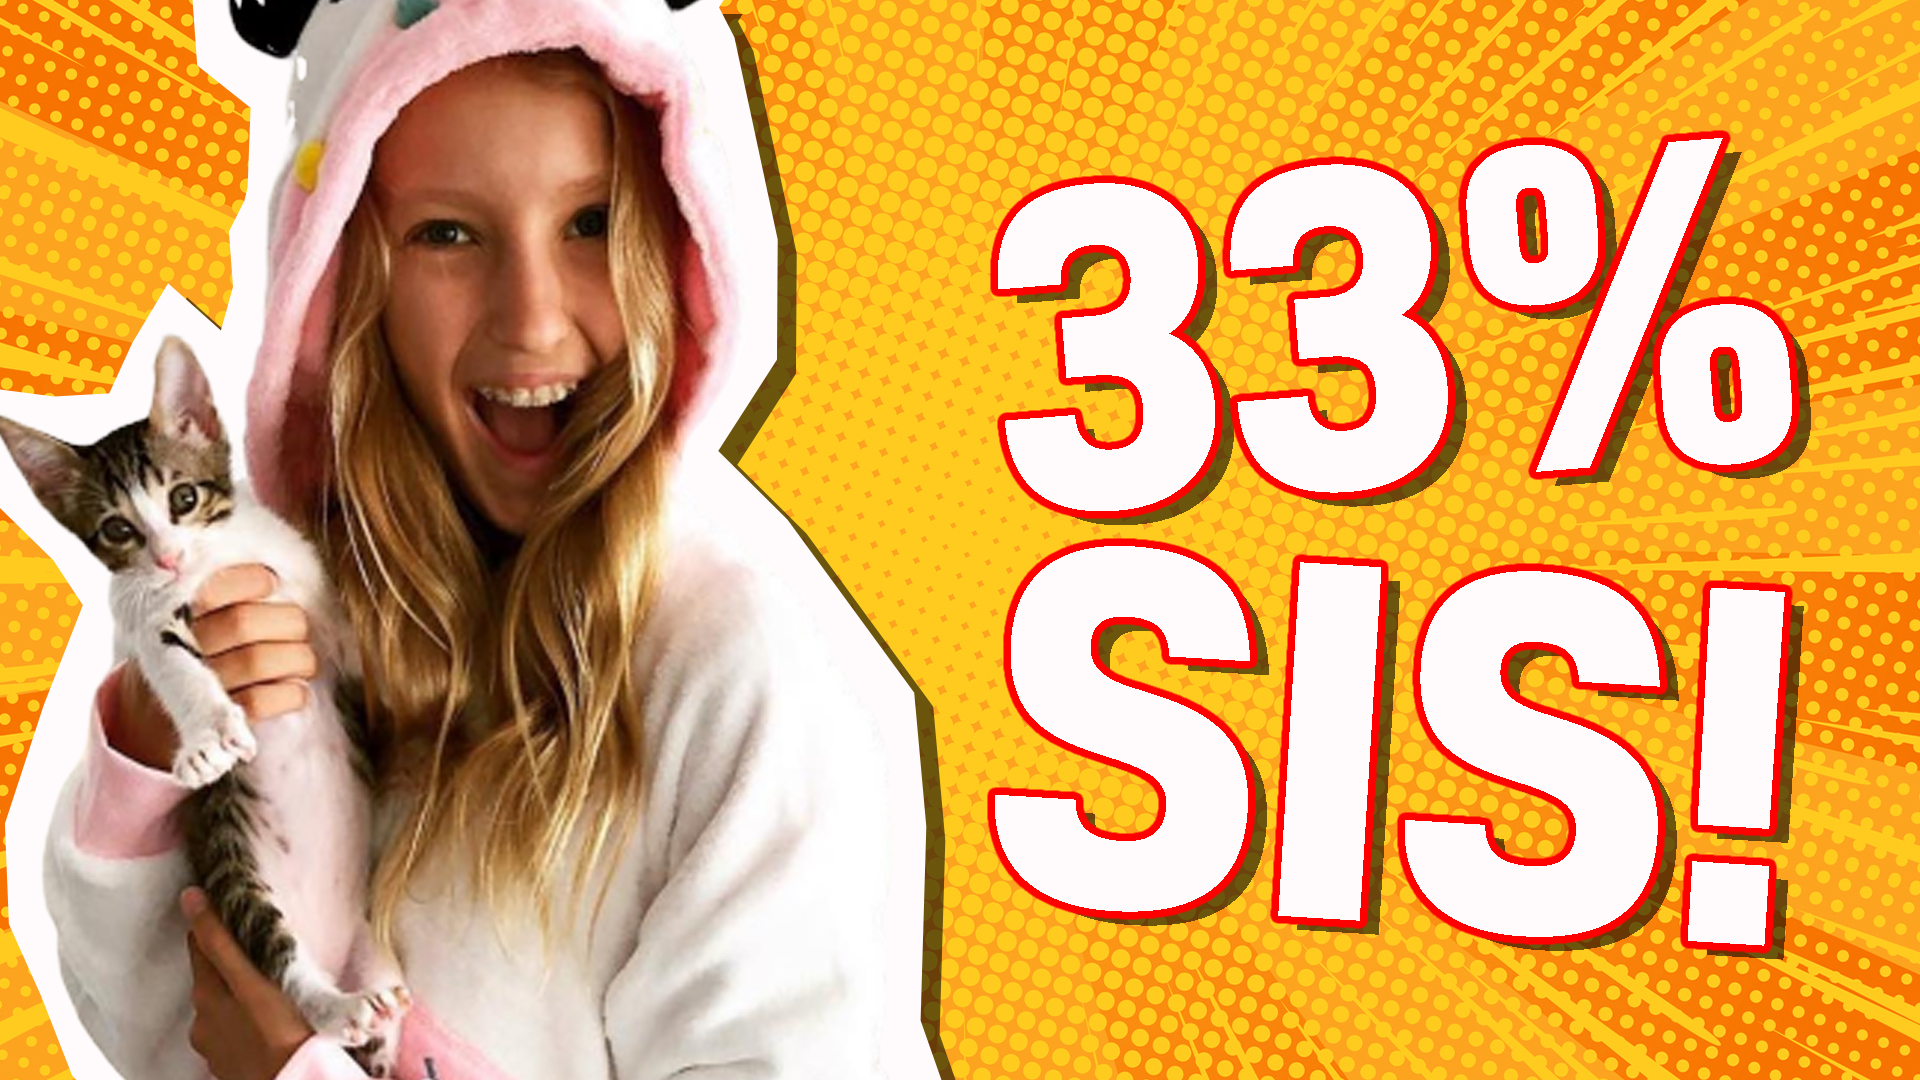 You are: 33% SIS!